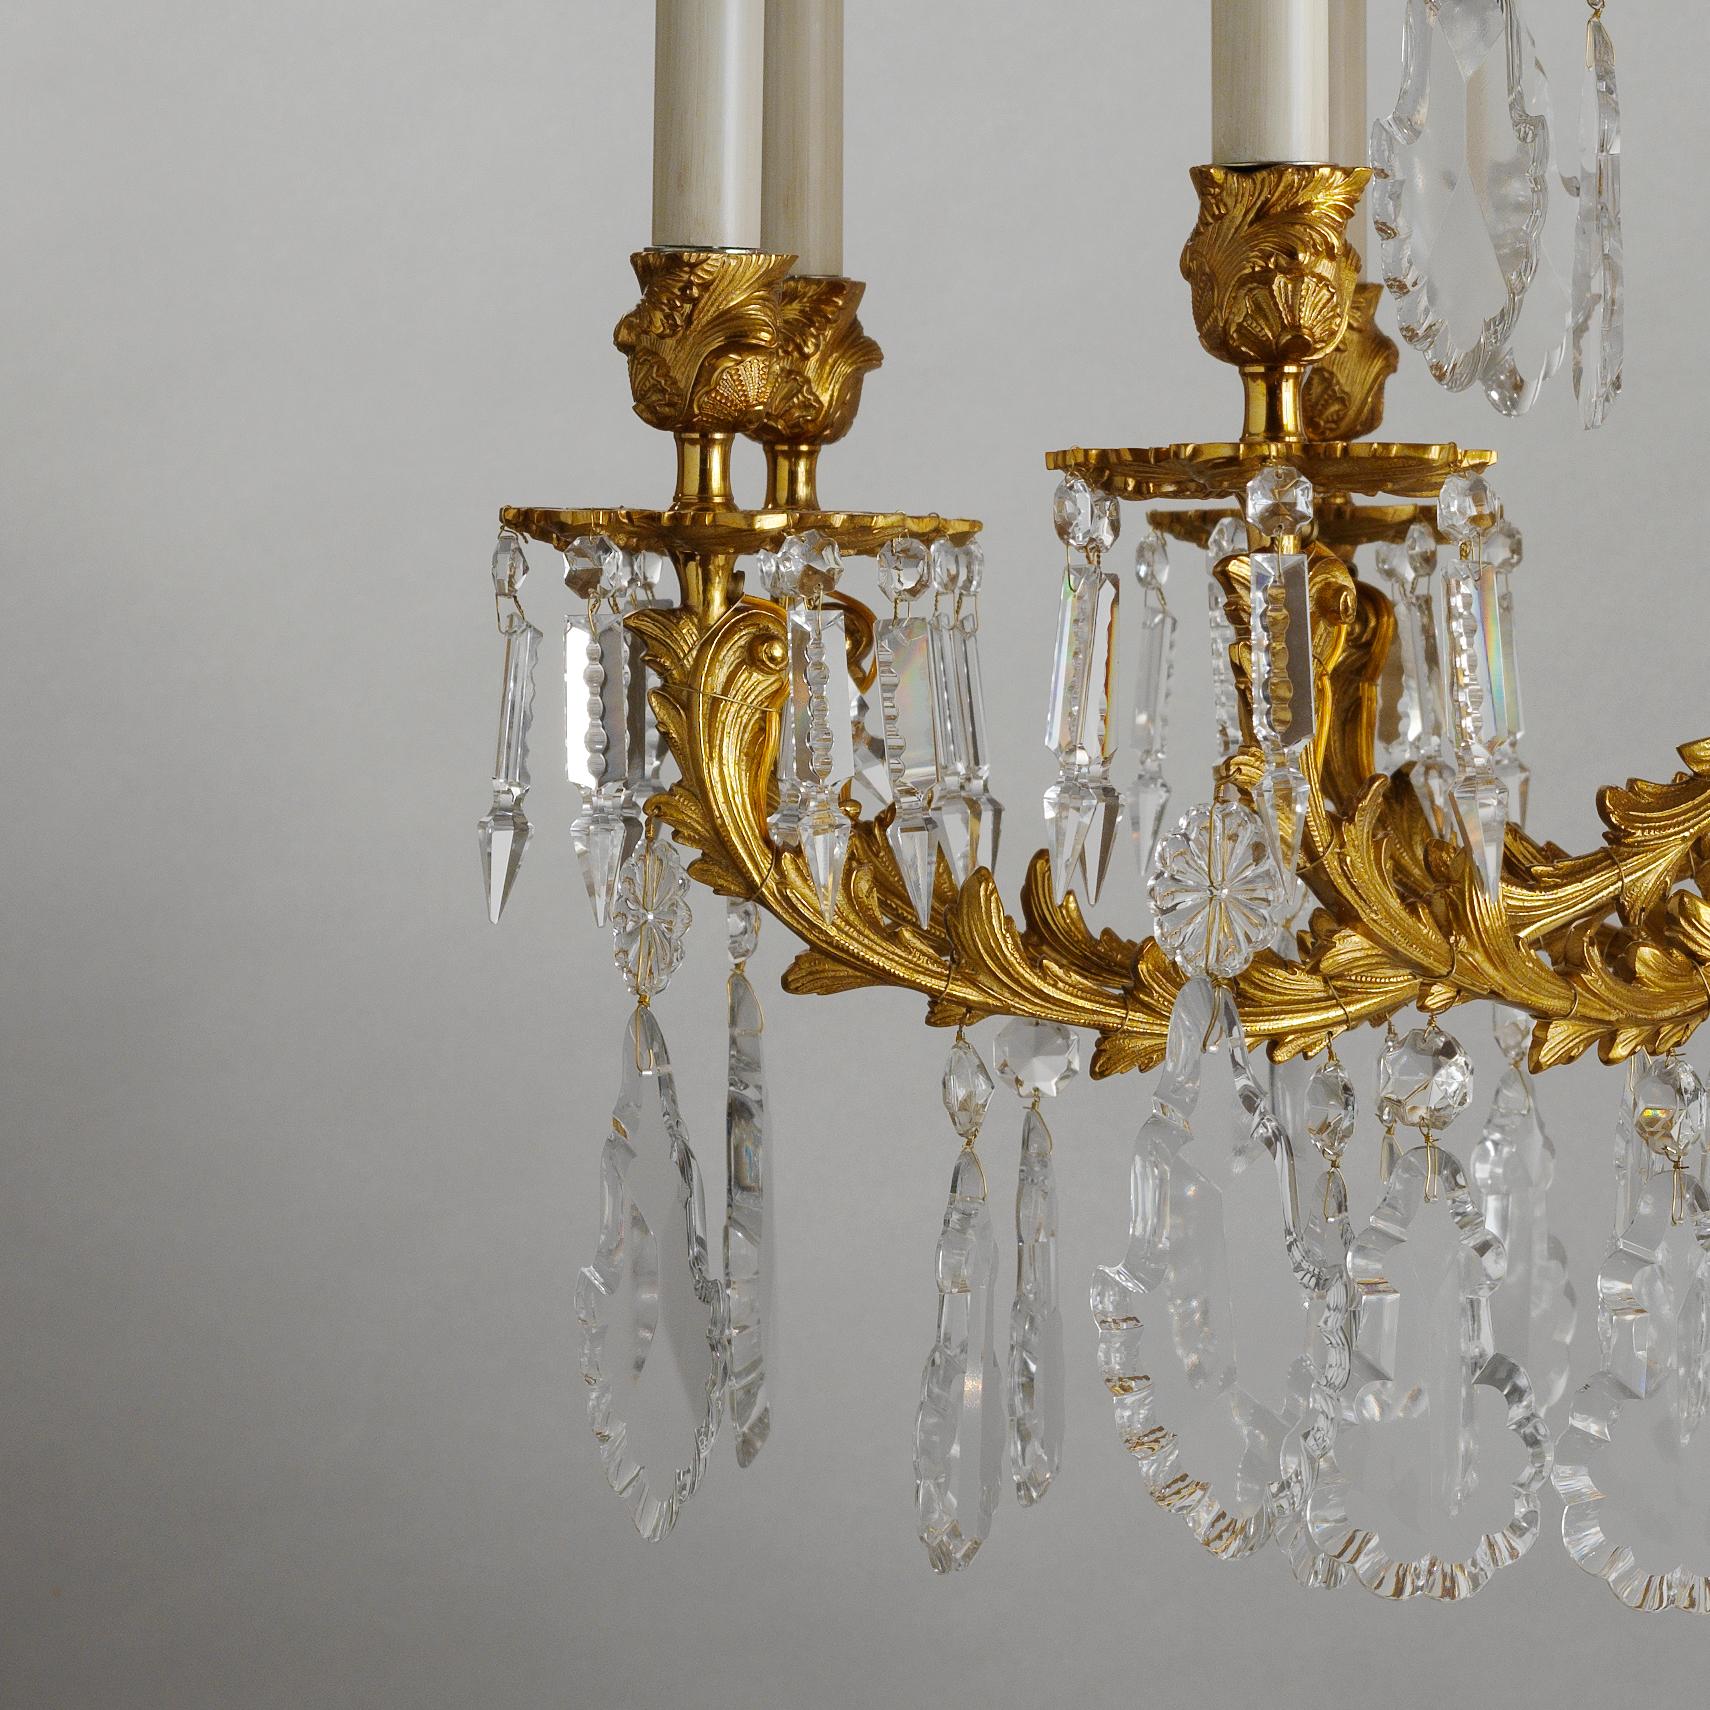 This finely chiseled French Rococò Style gilt bronze and crystal chandelier by Gherardo Degli Albizzi has twenty-four lights and it shows classical features of that period such acanthus leaves and vegetal decoration all over.
Foliate crown, which